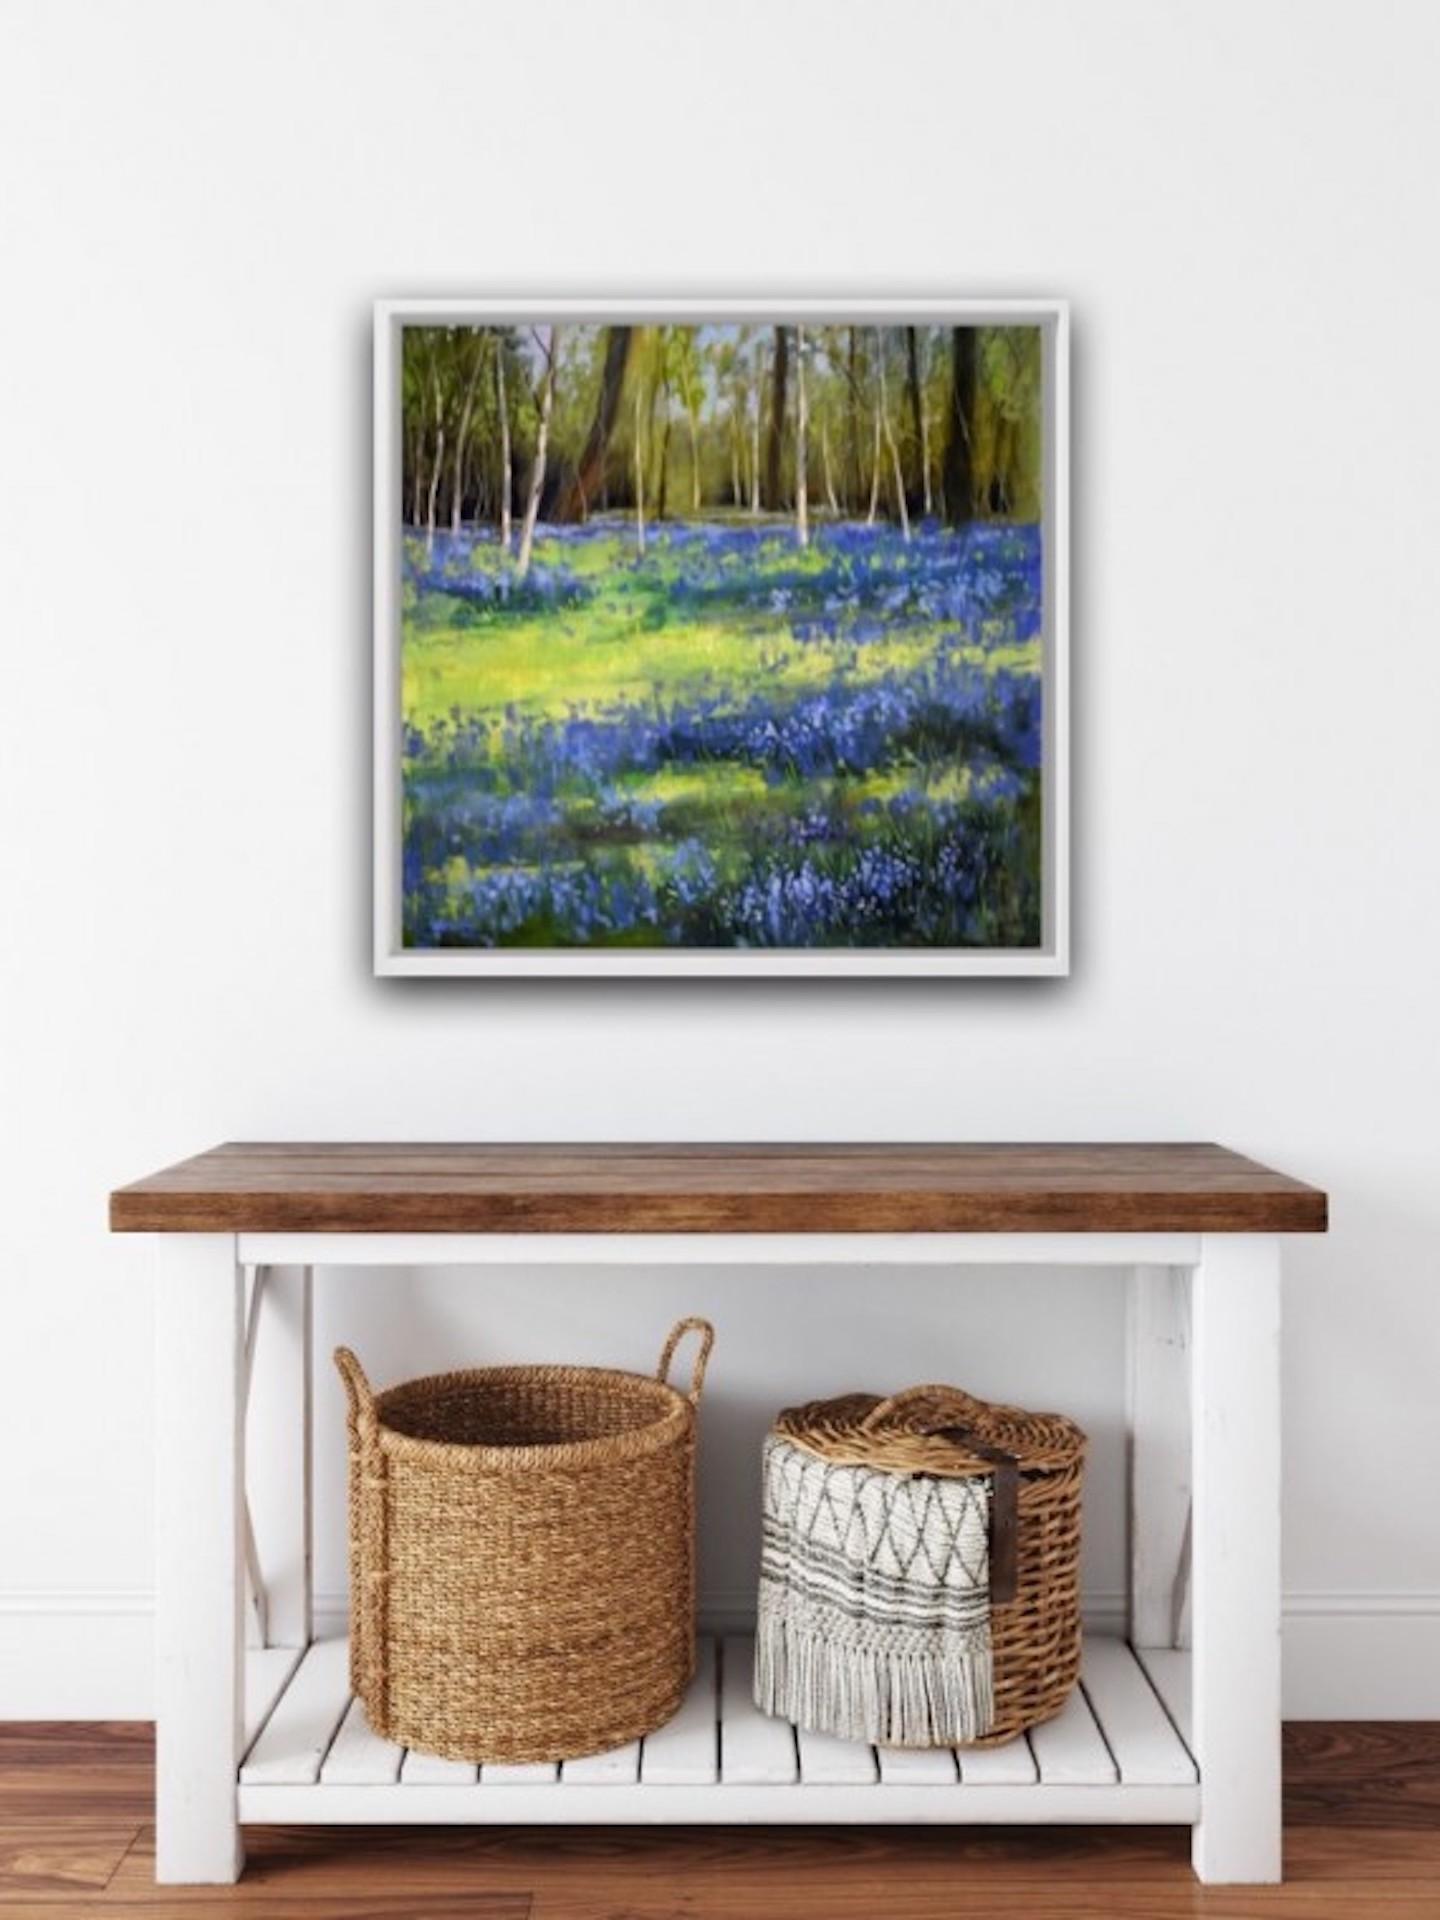 Caroline McMillan Davey
Scent of spring
Oil on Canvas
Original landscape on deep canvas, ready to hang.
W50cm x H50cm x D3.8cm
Sold unframed on deep canvas.

Artist comments : This fabulous bluebell wood near my home in Somerset gives such pleasure